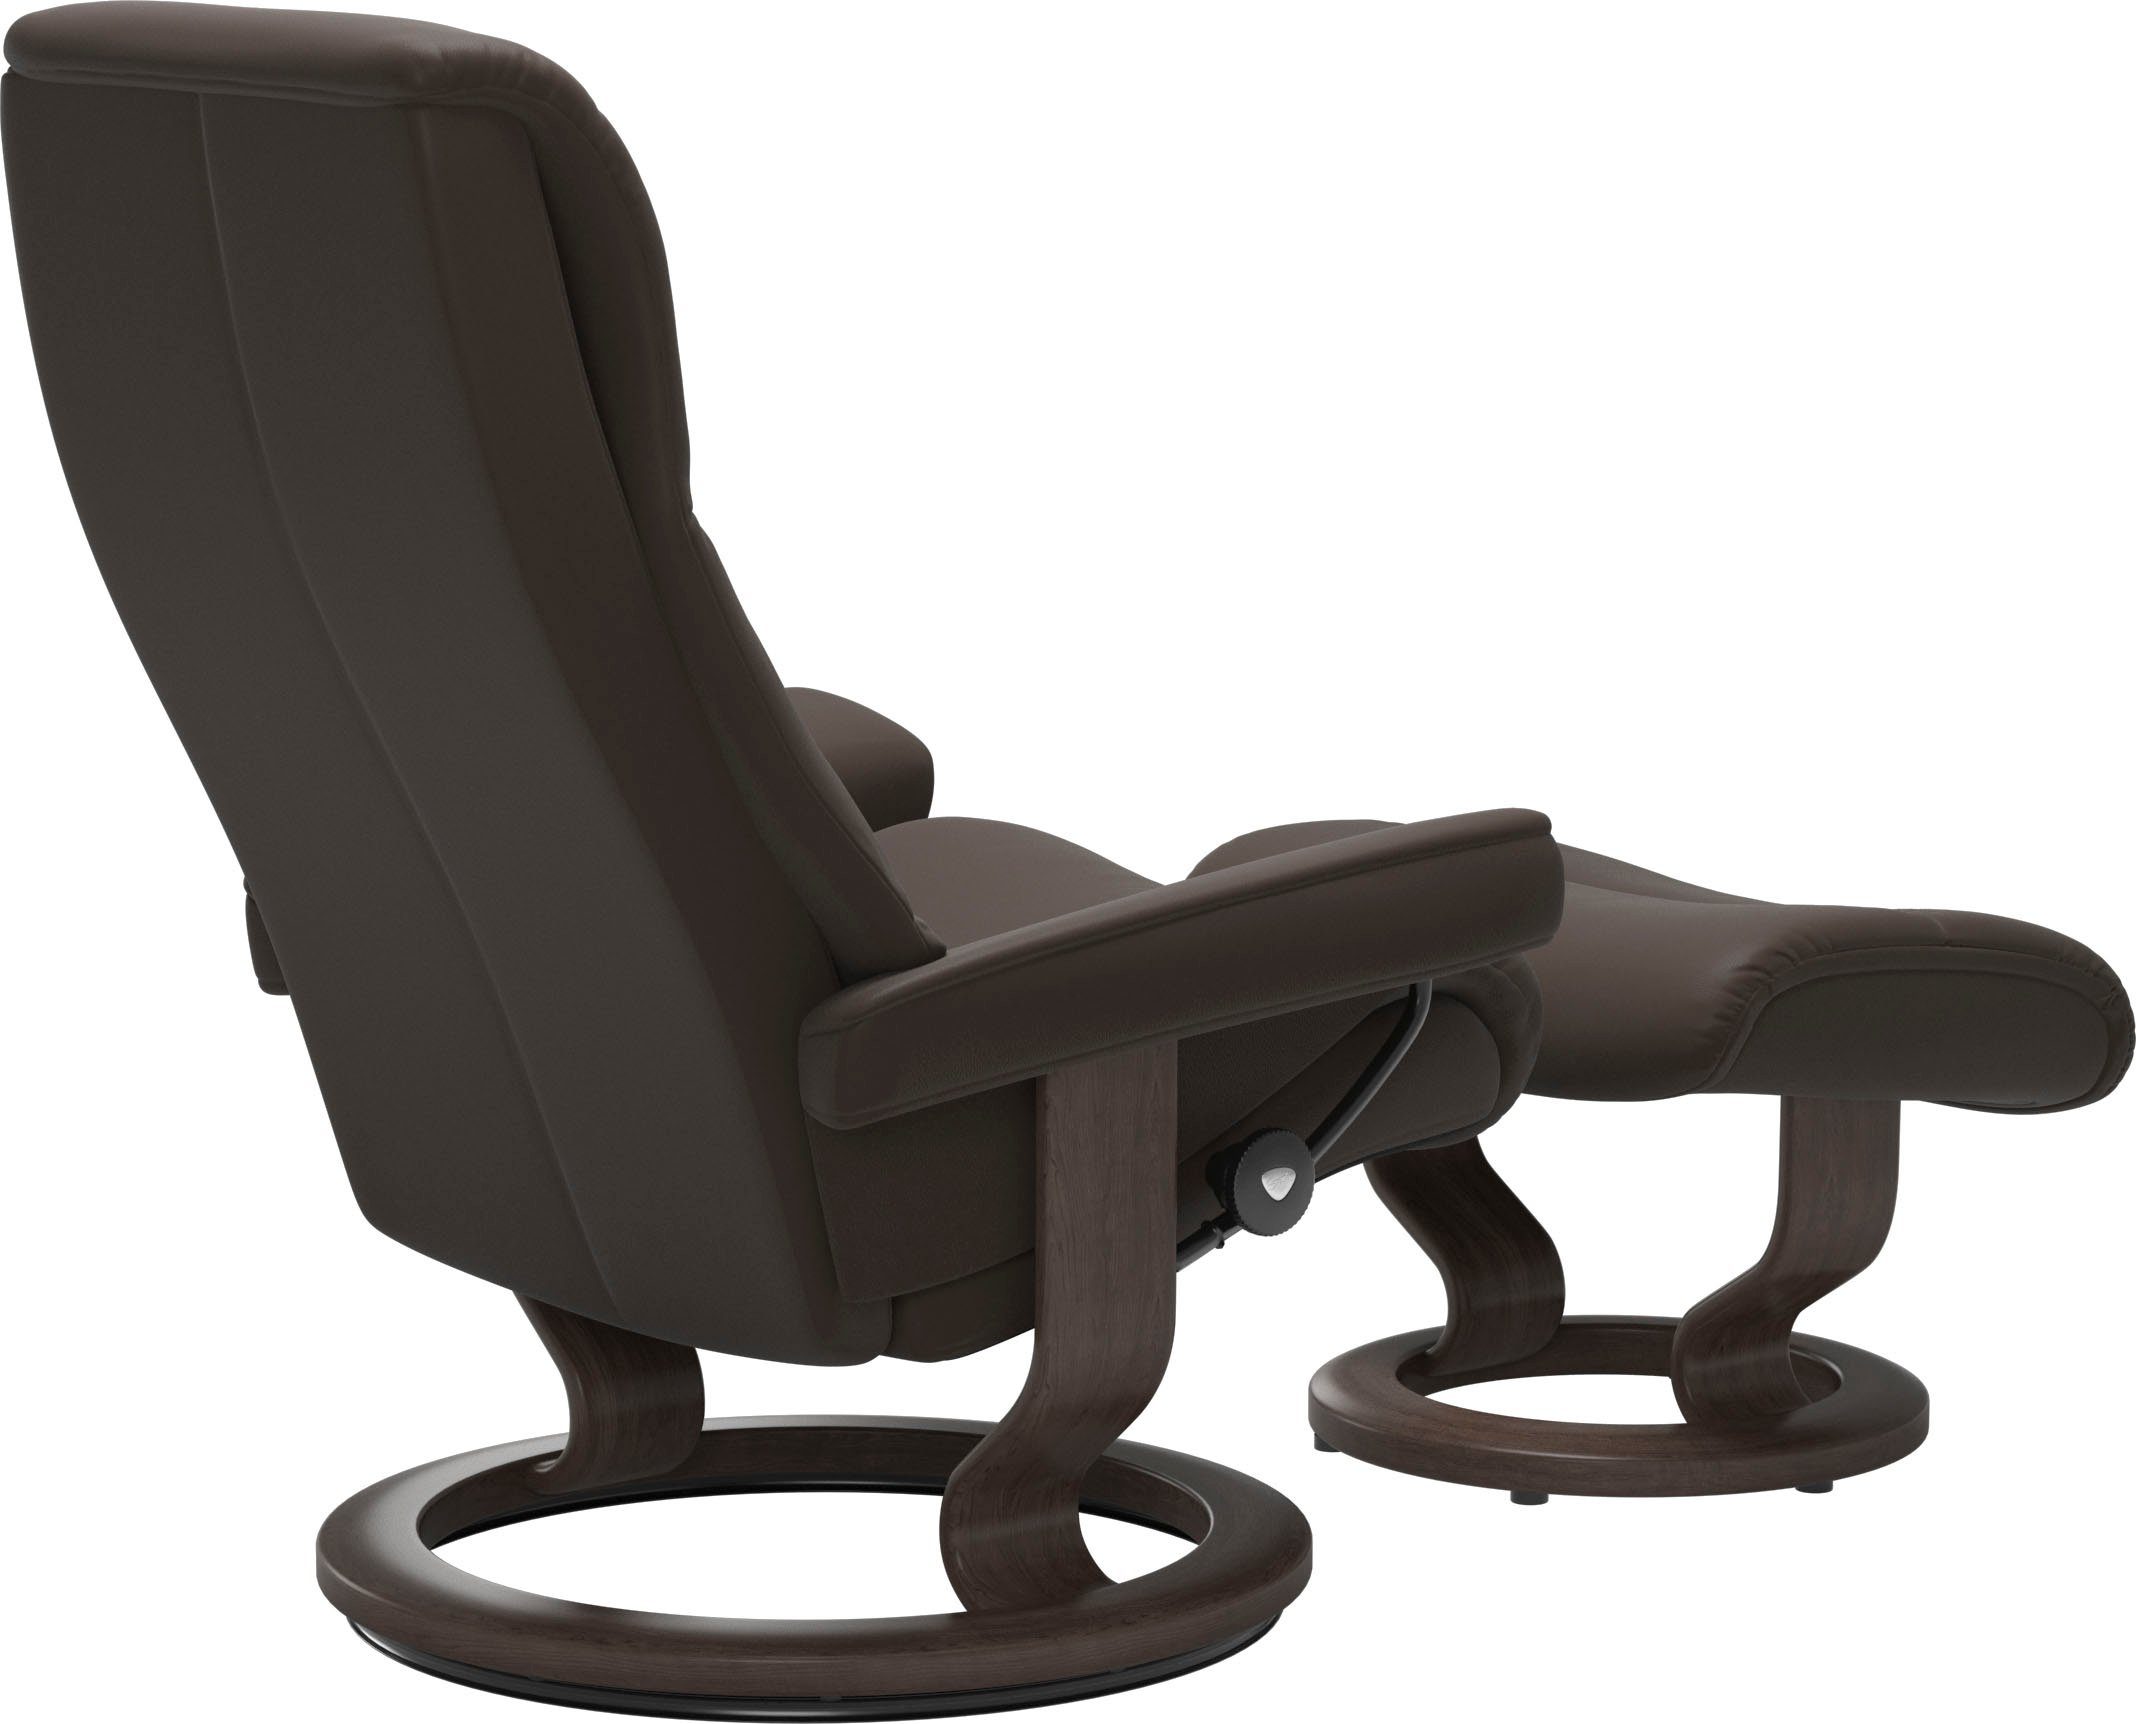 Classic Wenge L,Gestell mit Größe Stressless® Base, Relaxsessel View,